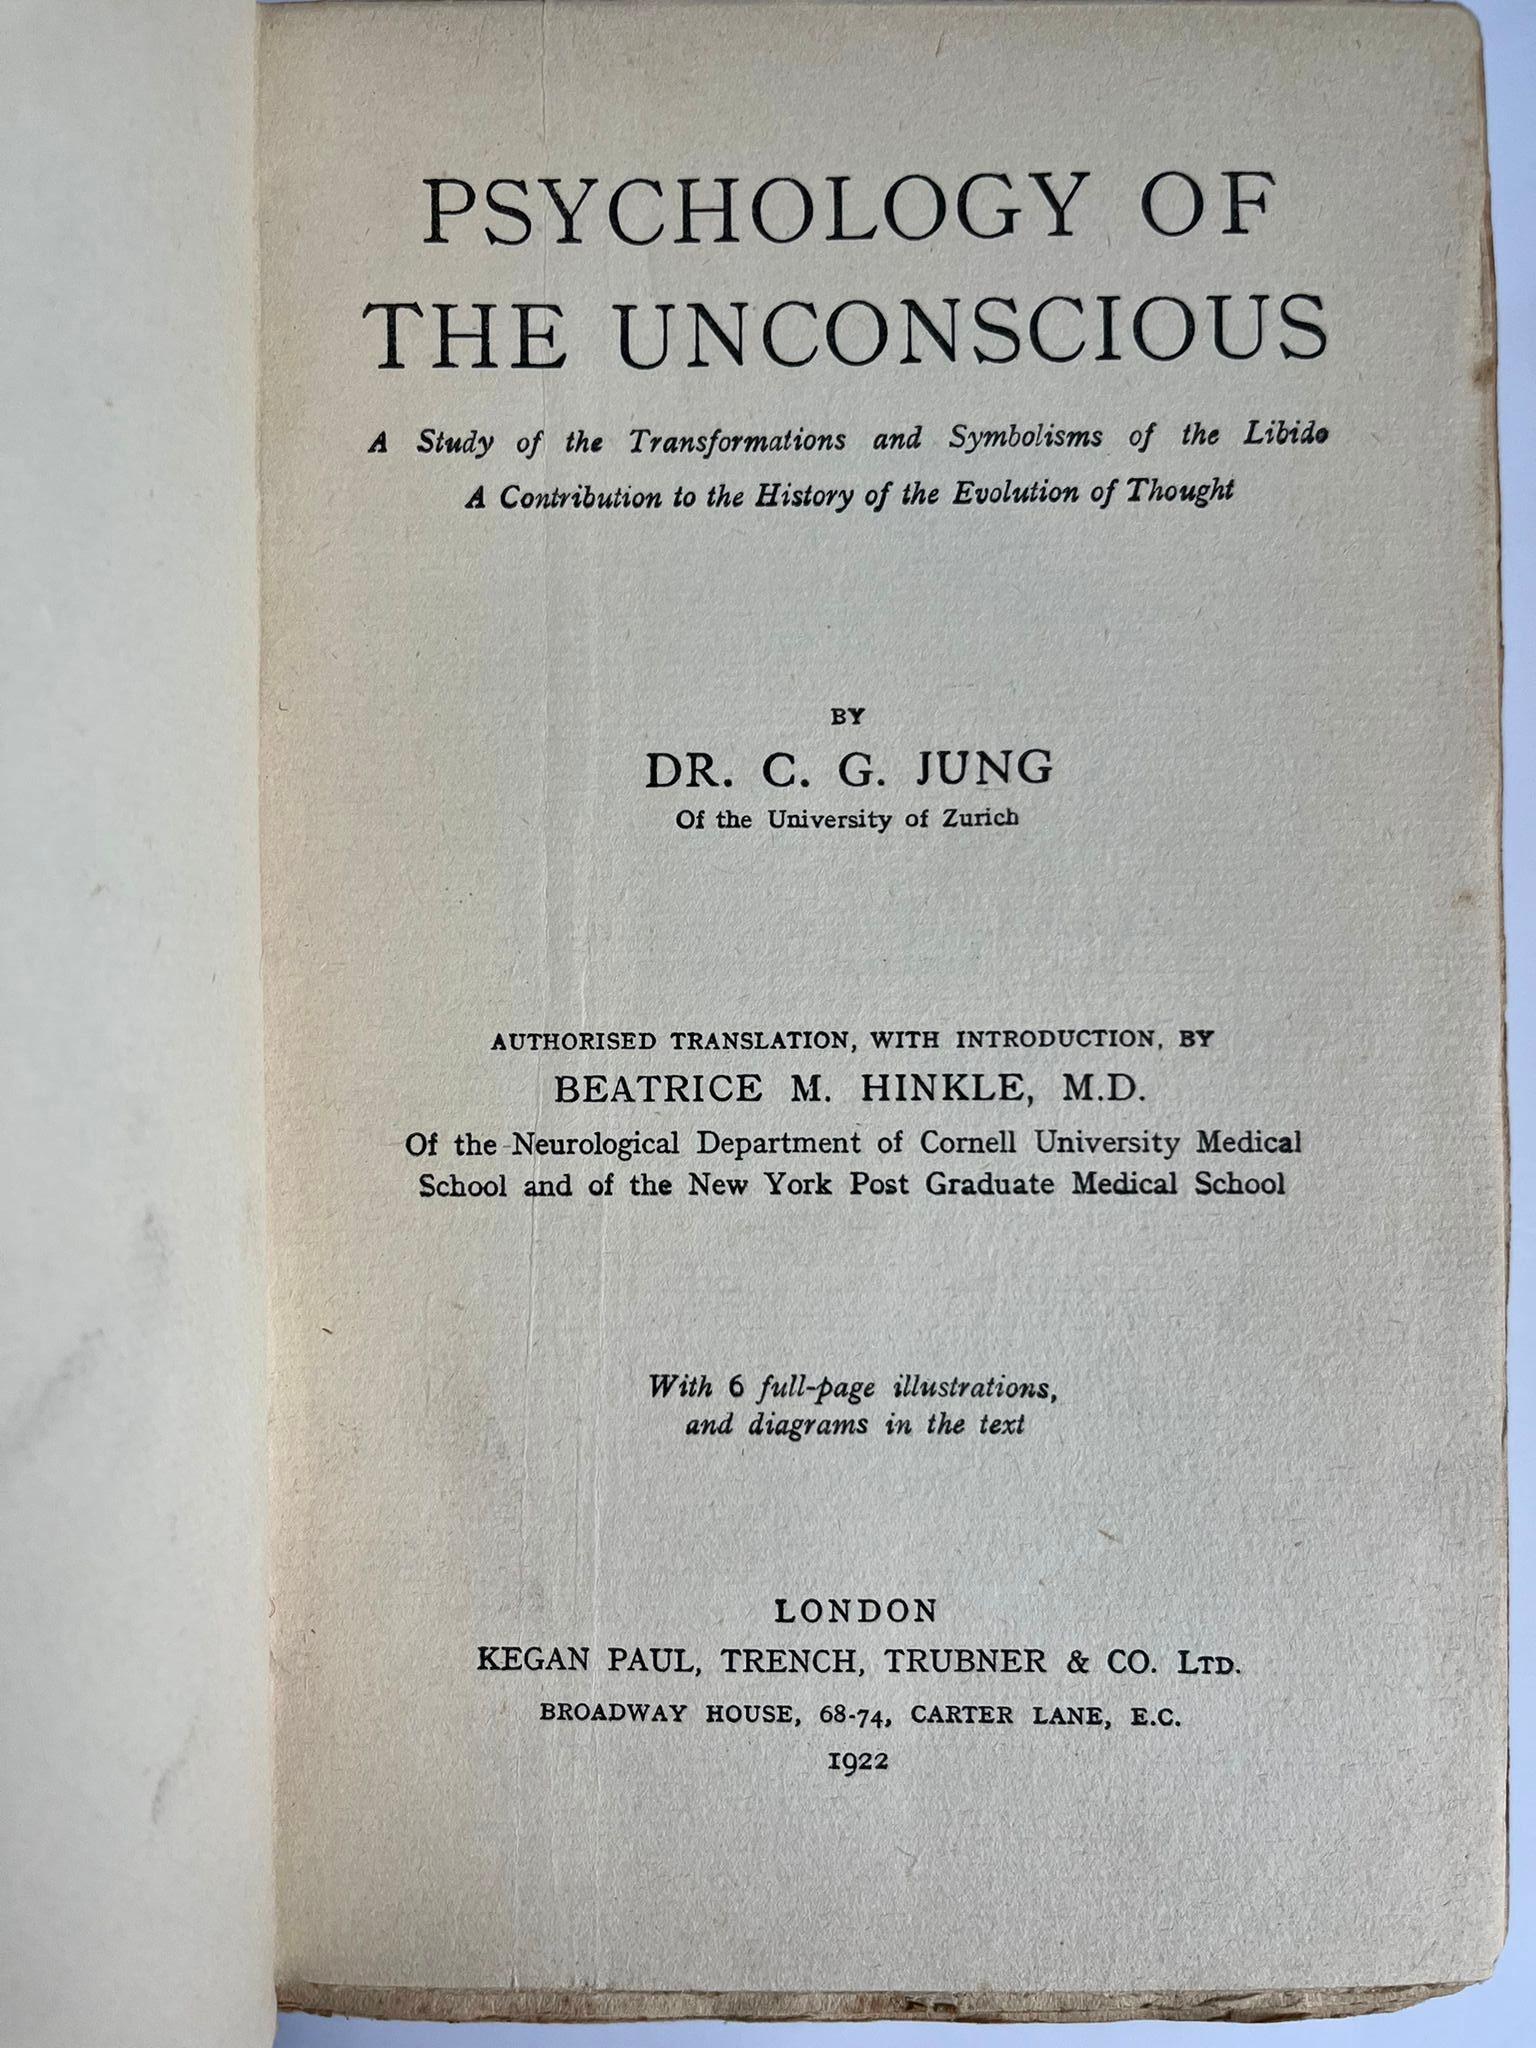 Psychology of The Unconscious by C. G. Jung